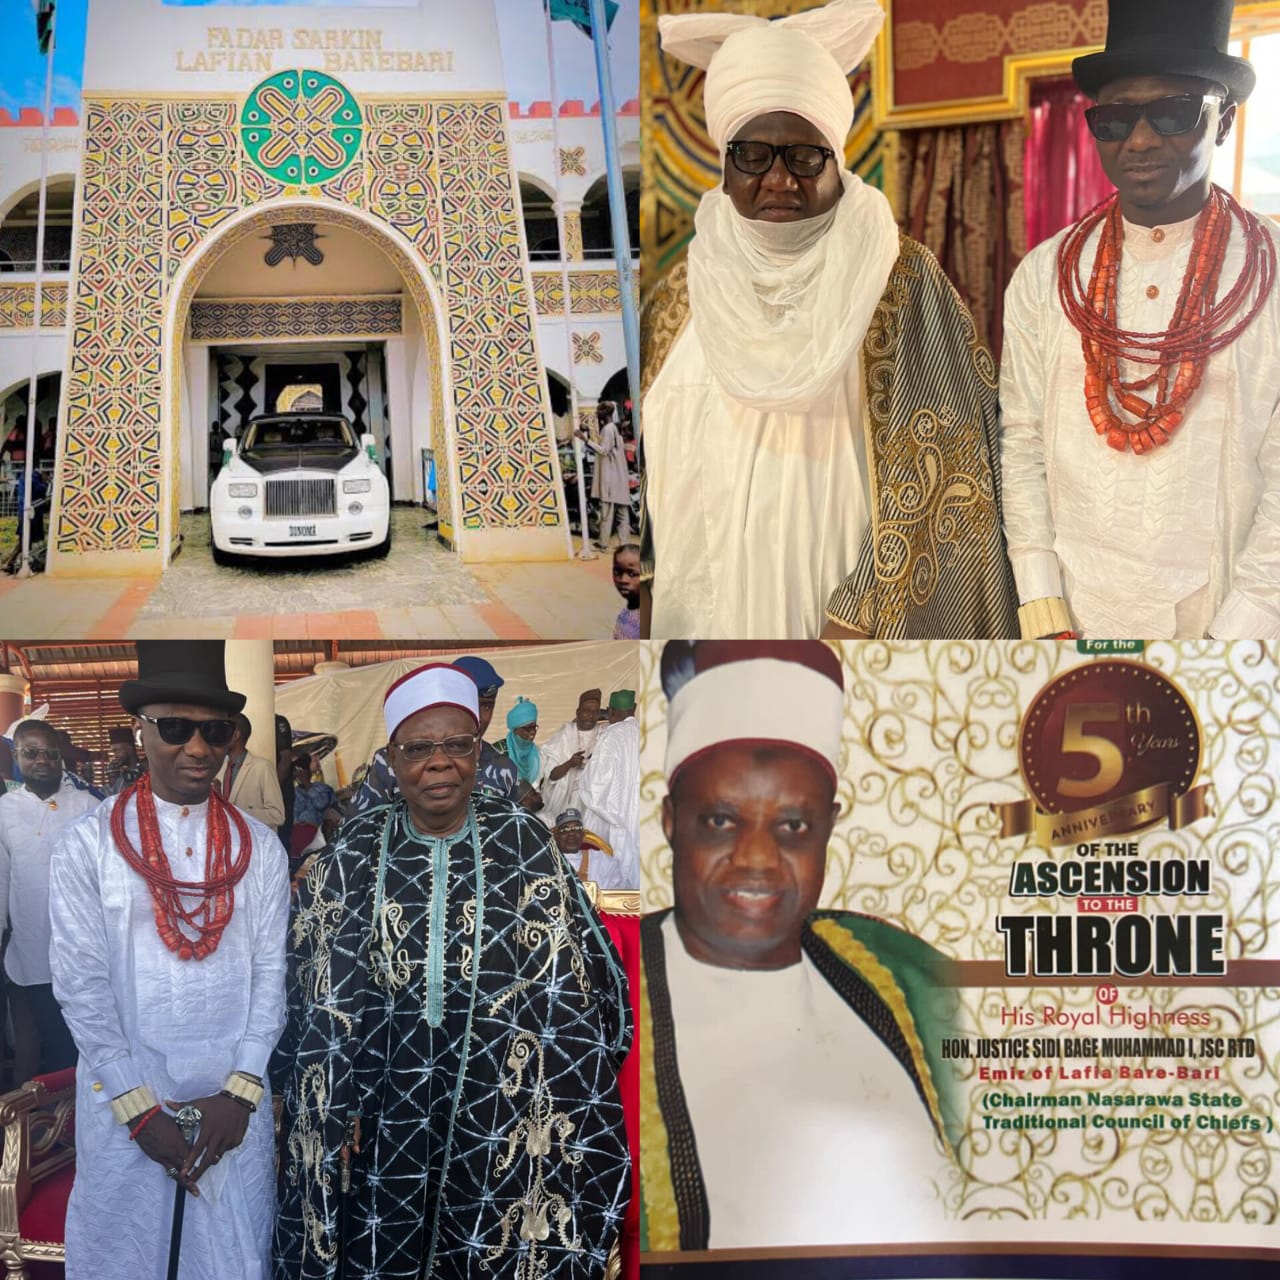 5th Year Anniversary of the Ascension on the Throne: The Emir of Lafiya Bare Bari HRH Hon Justice Sidi Bage Muhammad I JSC RTD receives HRH Dr Selky Kile Torughedi in Lafiya